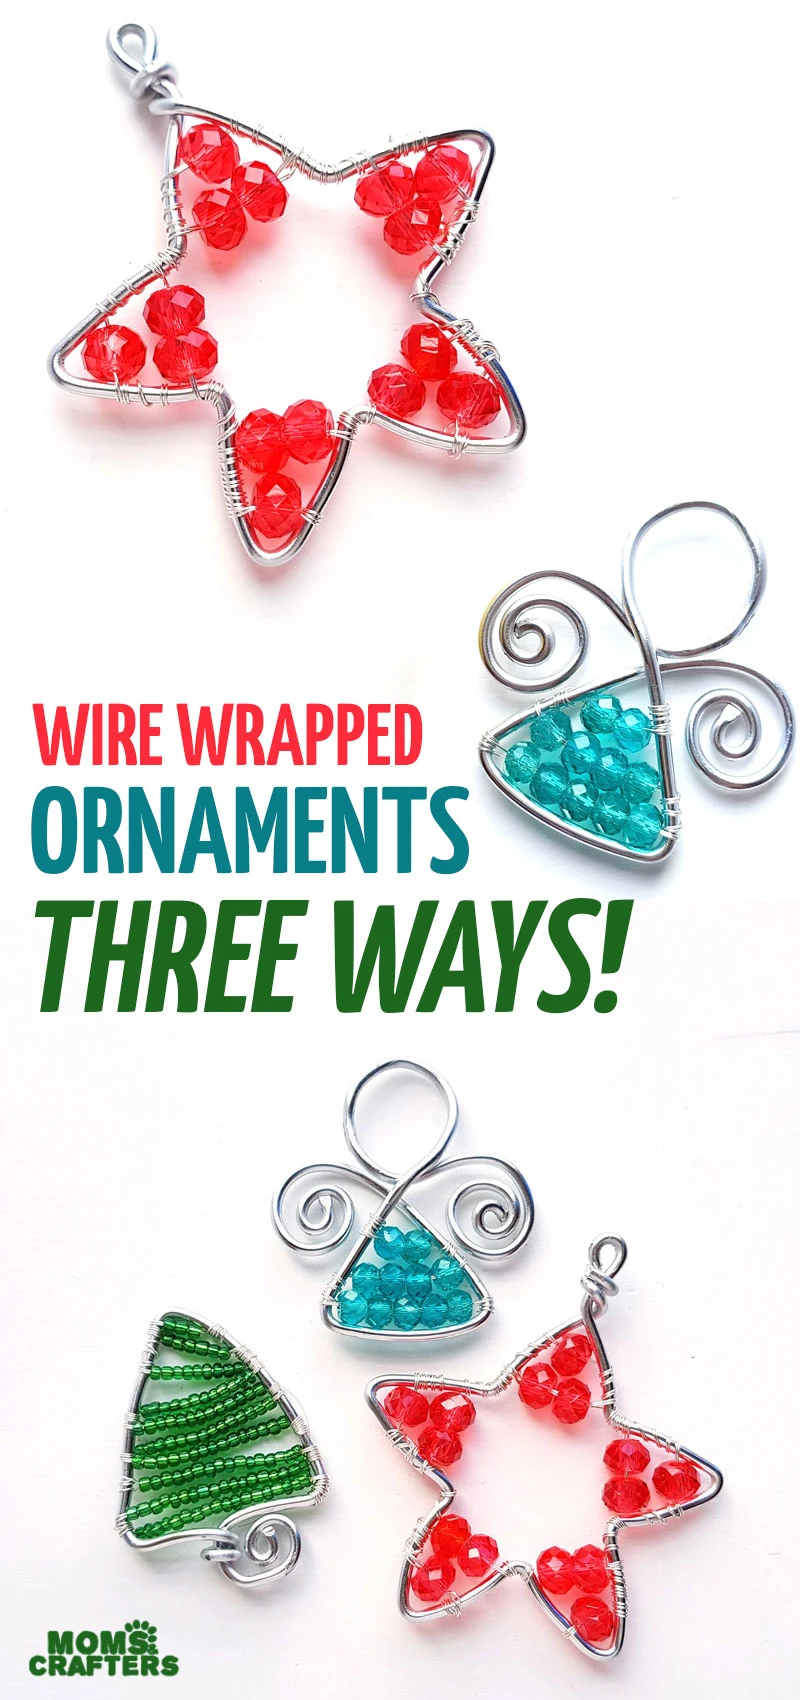 Click to learn how to make wire wrapped ornaments for your Christmas tree three ways! Make an angel ornament, a beaded tree and more cool wire wrapped ornament tutorials for adults!